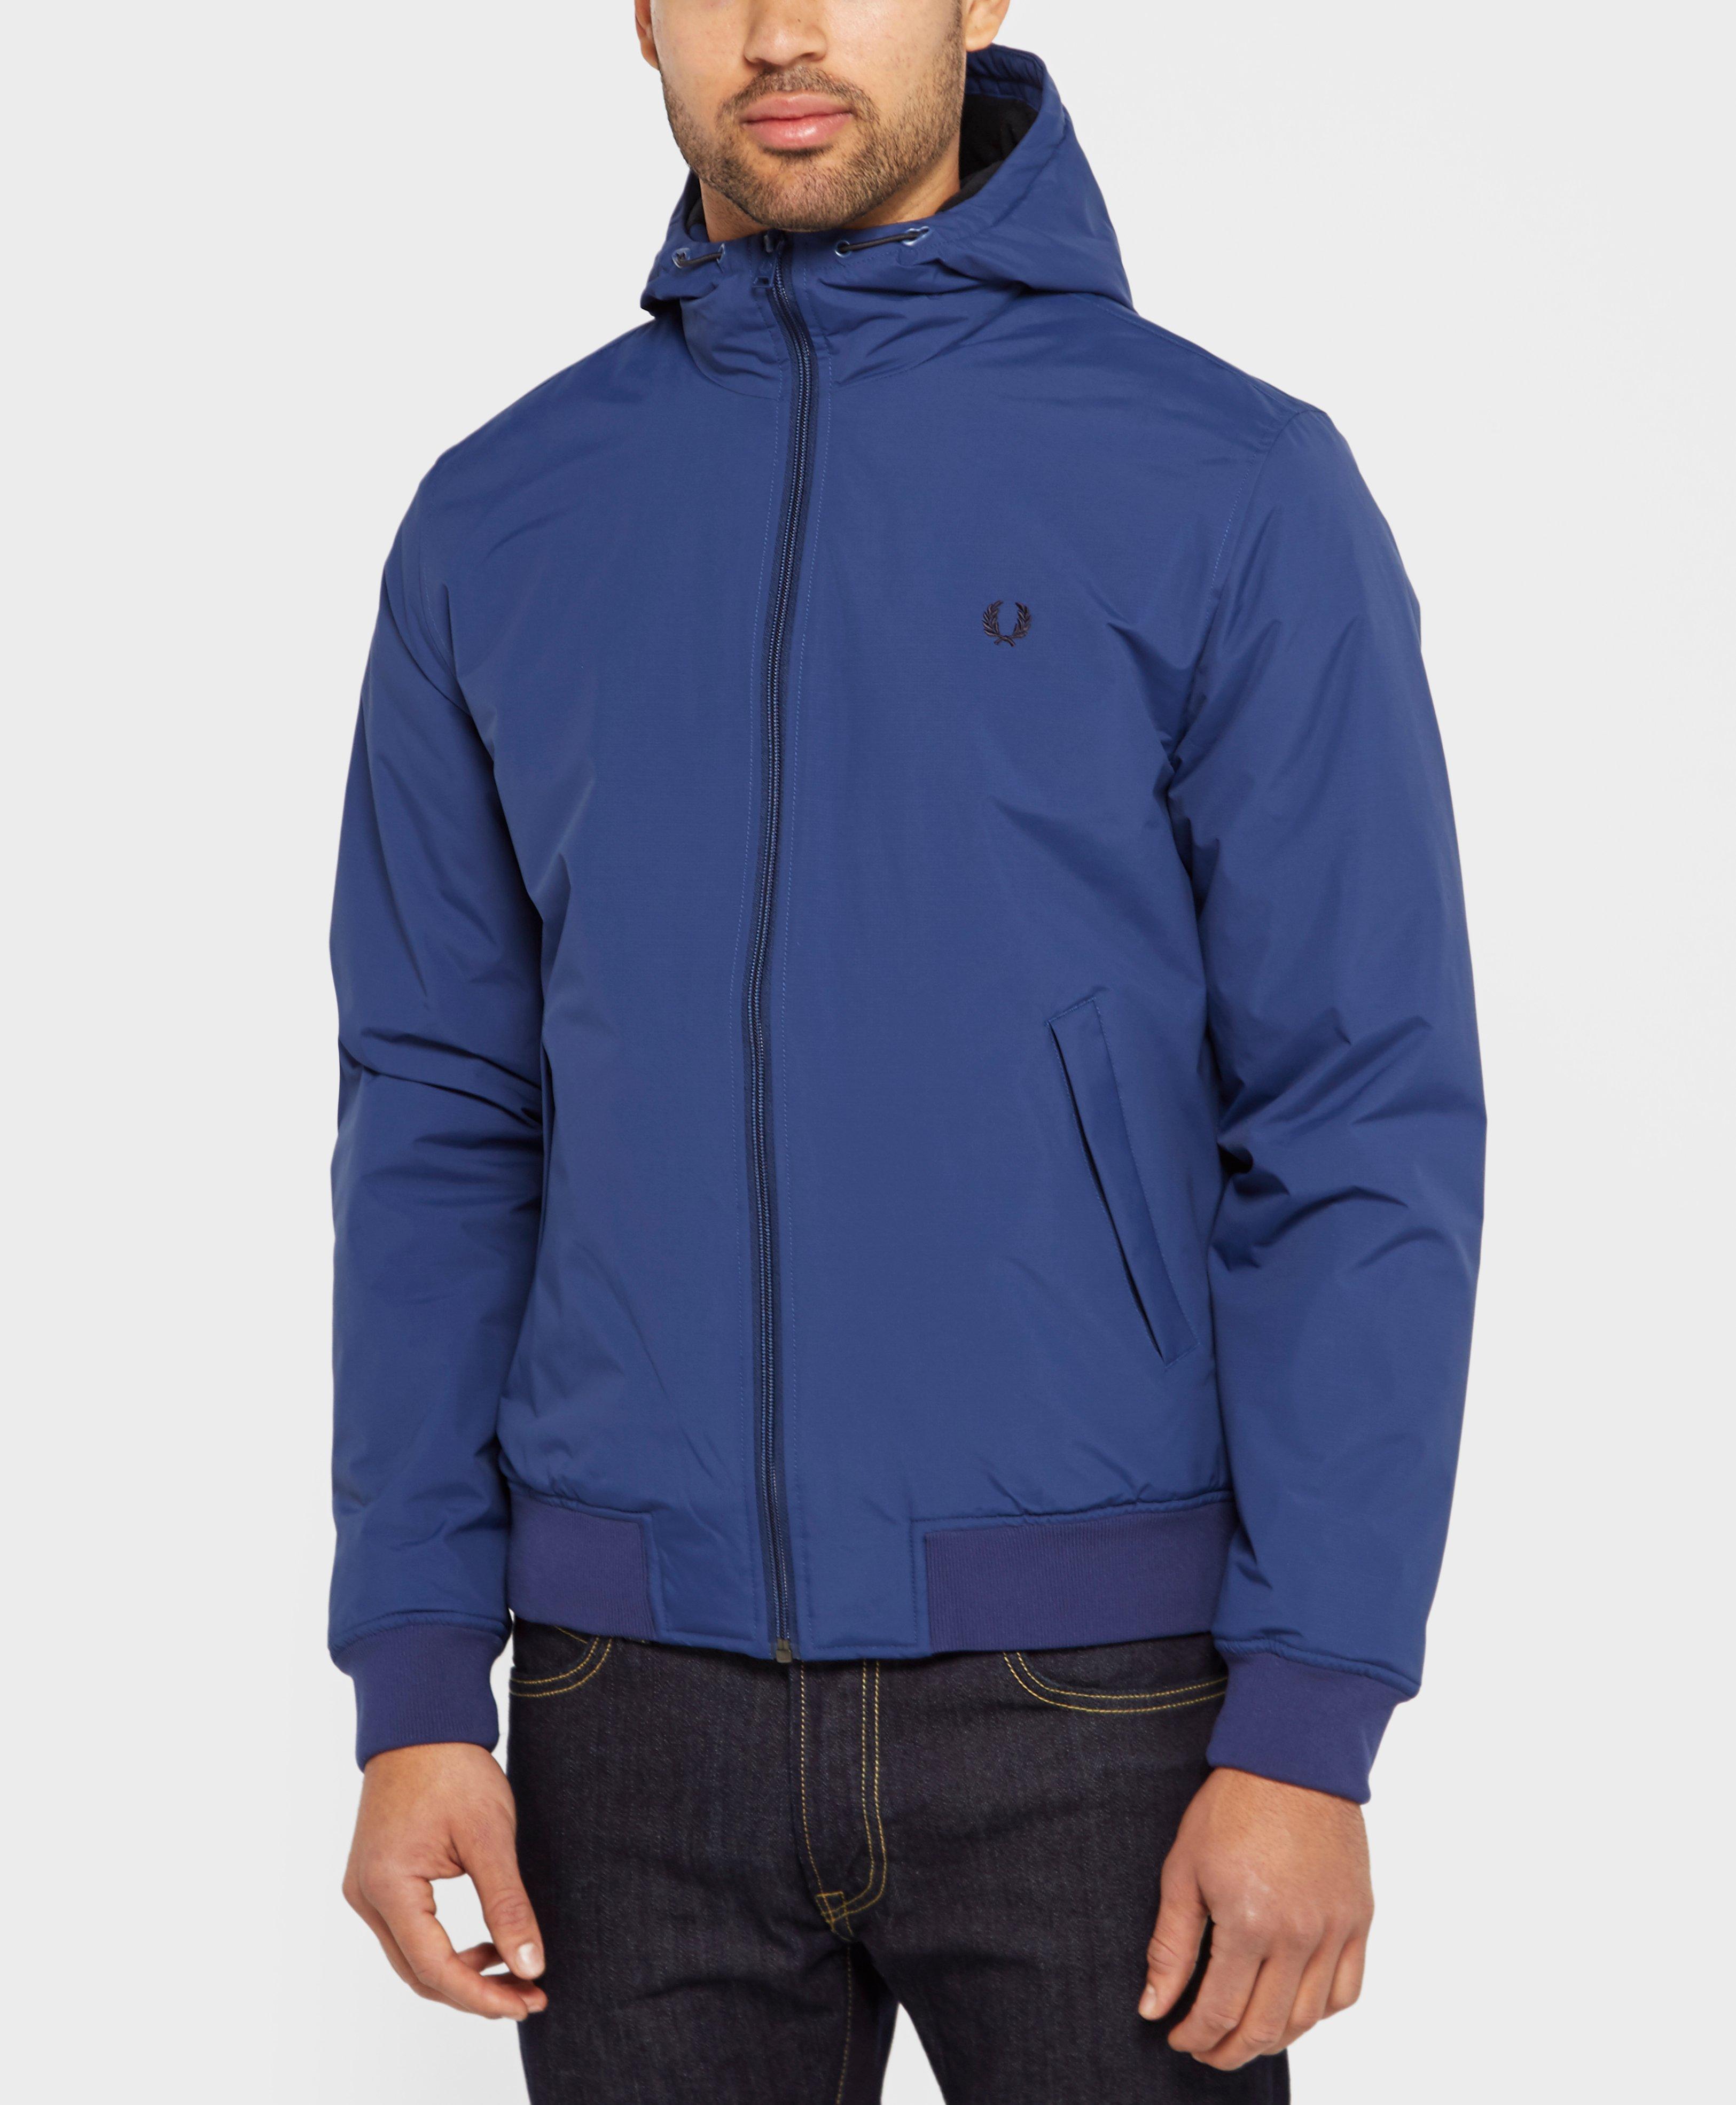 Lyst - Fred Perry Brentham Hooded Lightweight Jacket in Blue for Men